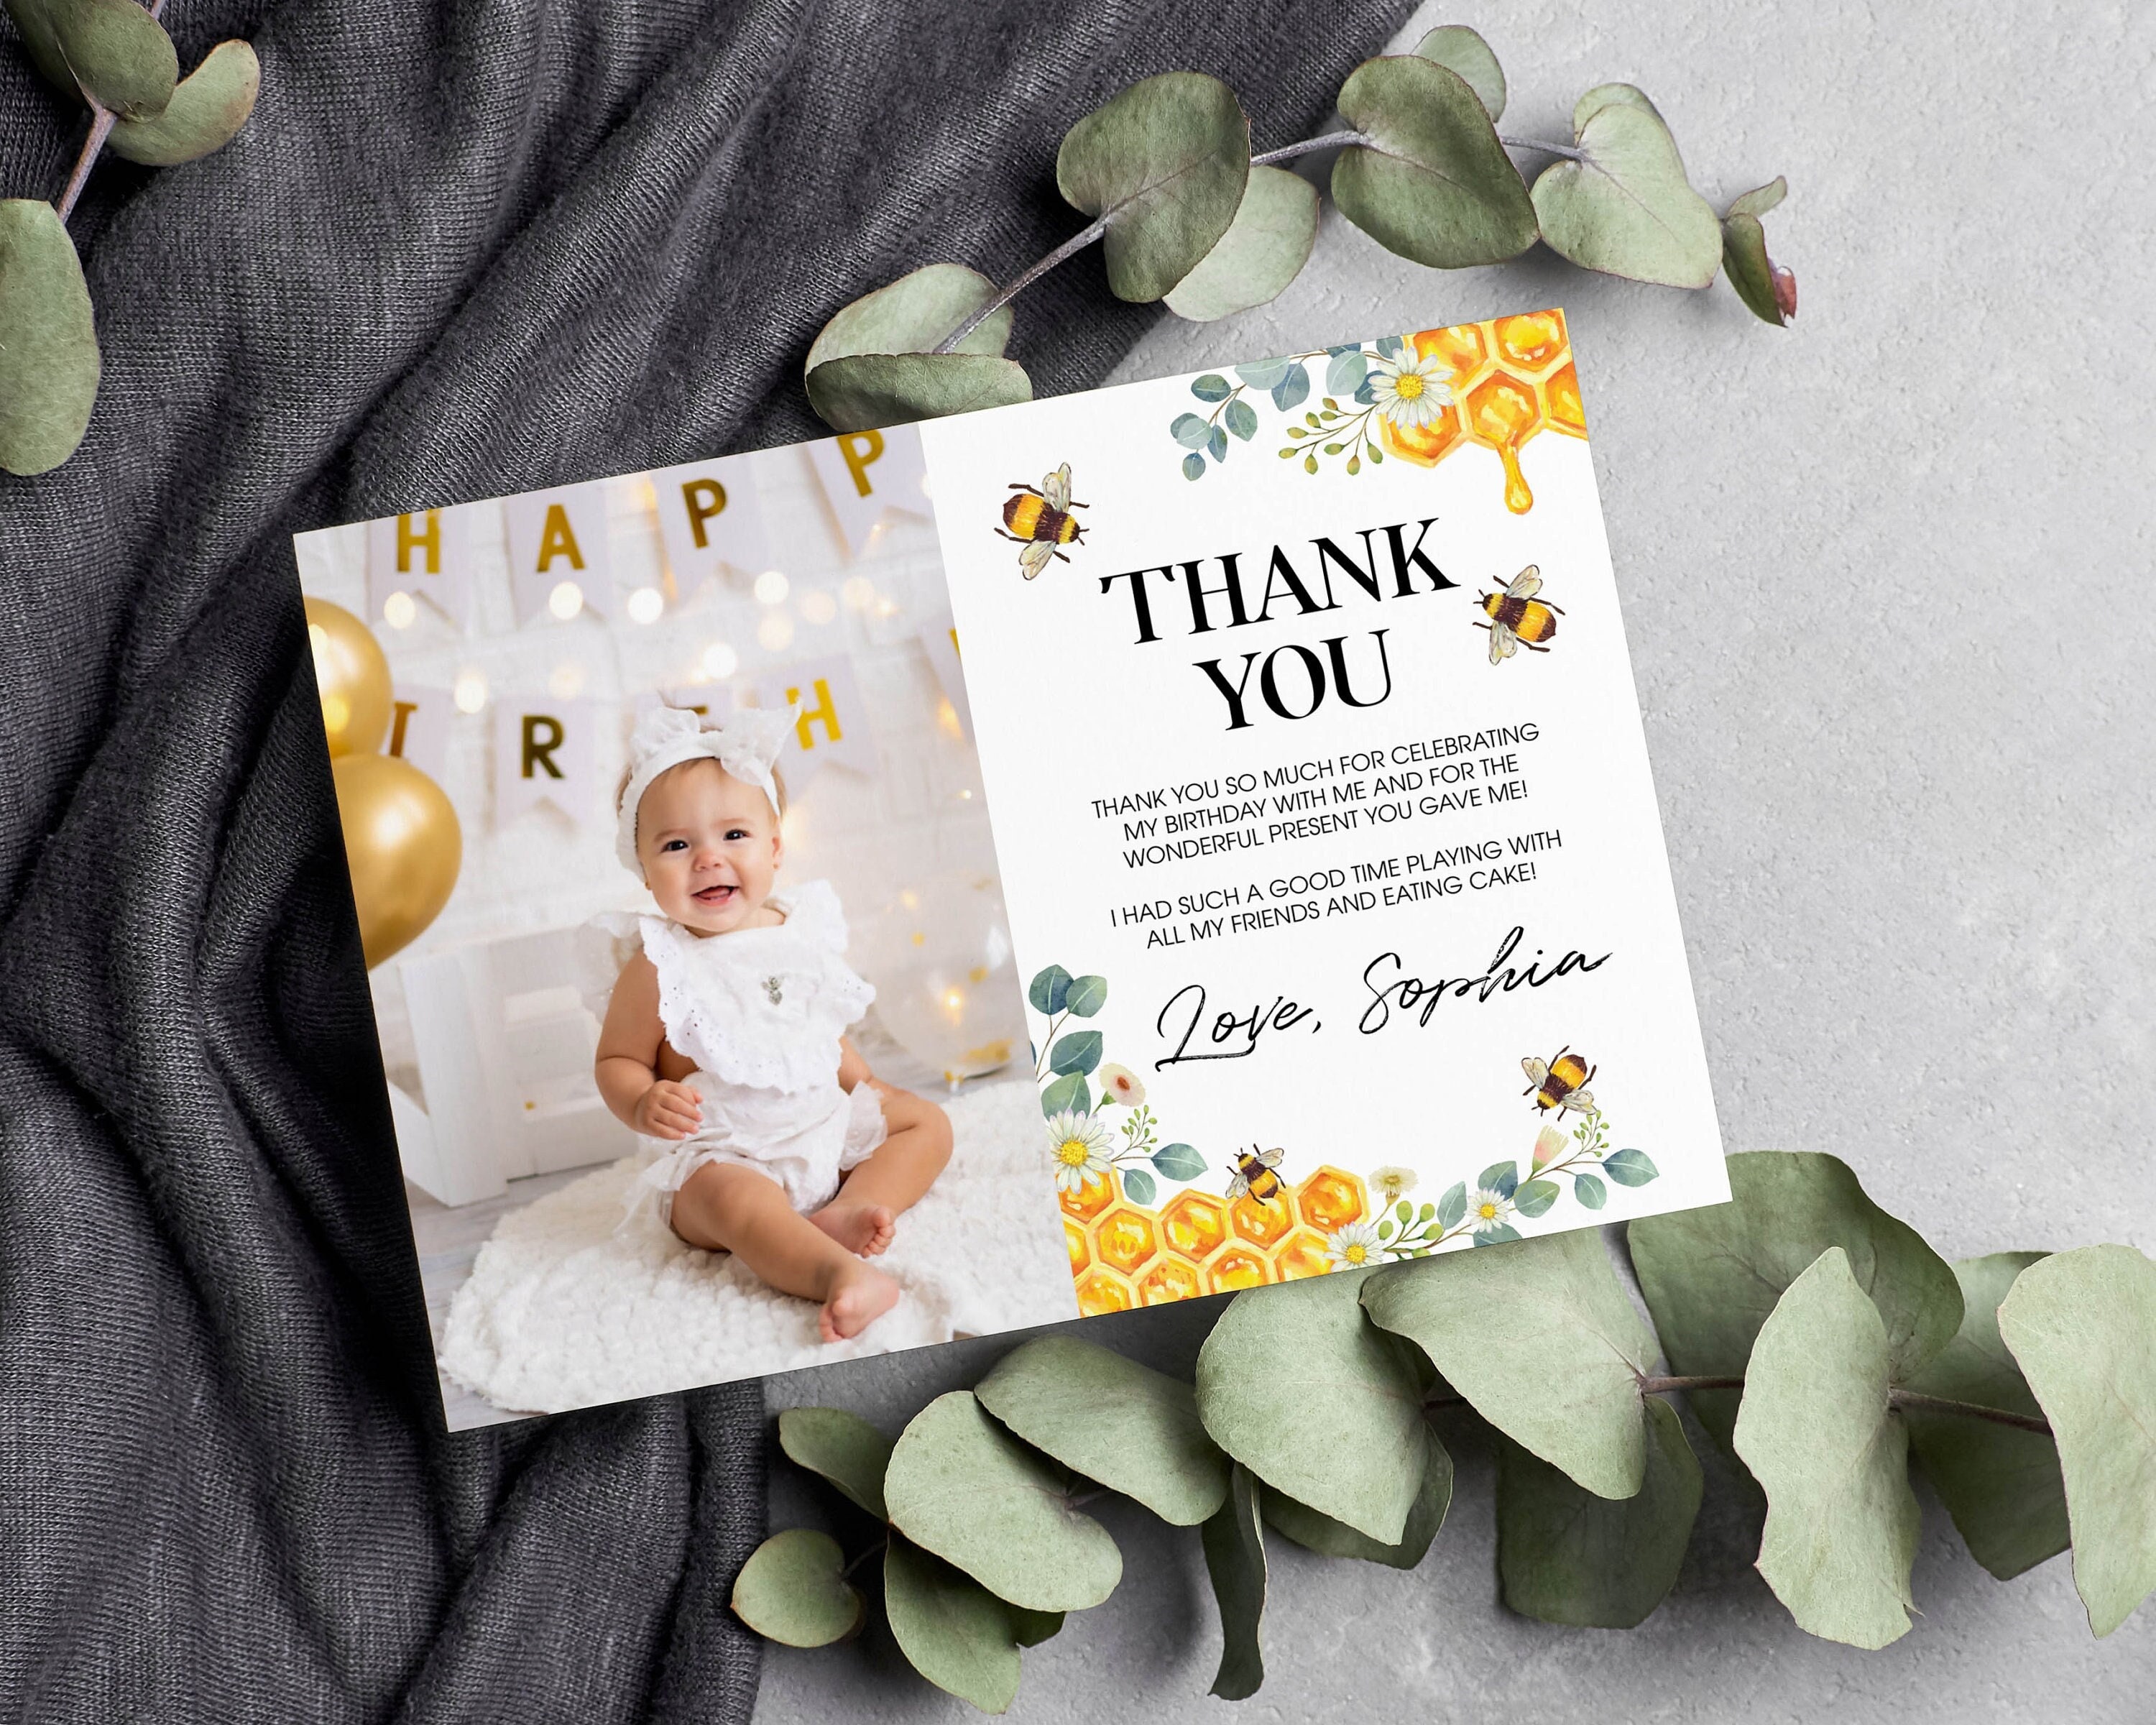 BugsNBees > Bee Gifts > Buzzy Bumblebee Thank-You Cards, pk/8